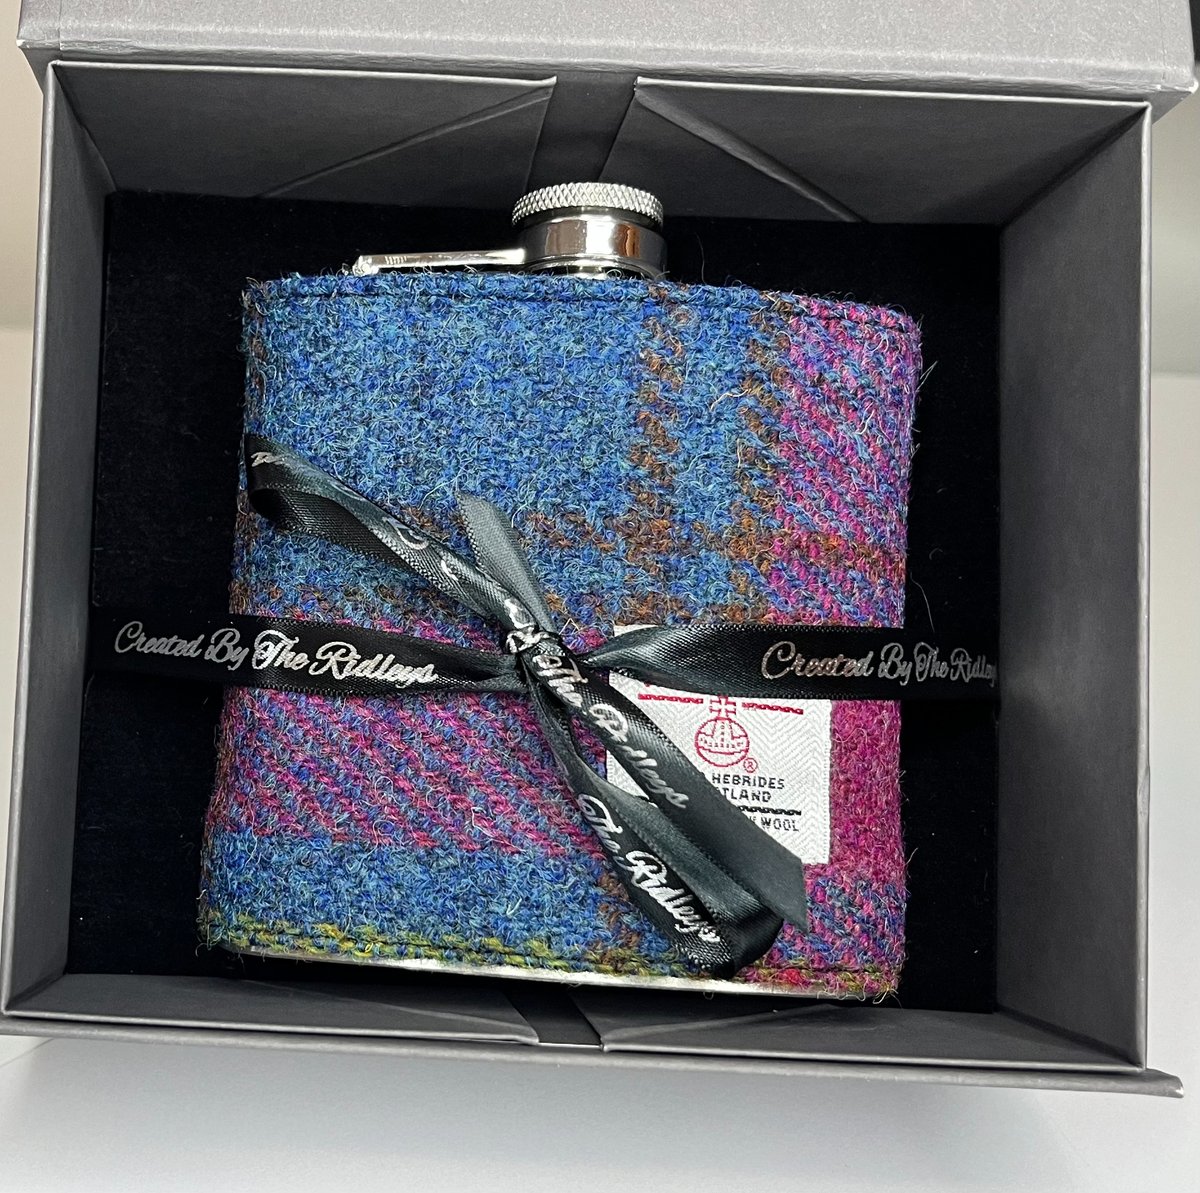 🎁 Sip in style! 🥃 Our Harris Tweed Hip Flask is back! 🌟 Indulge in luxury and be ready to gift with its beautiful box. 😍 Hurry, they're flying off the shelves! Don't miss out! 🎉 #HarrisTweedChic #HarrisTweedElegance #harristweedhipflask #harristweedgift #harristweedgifts